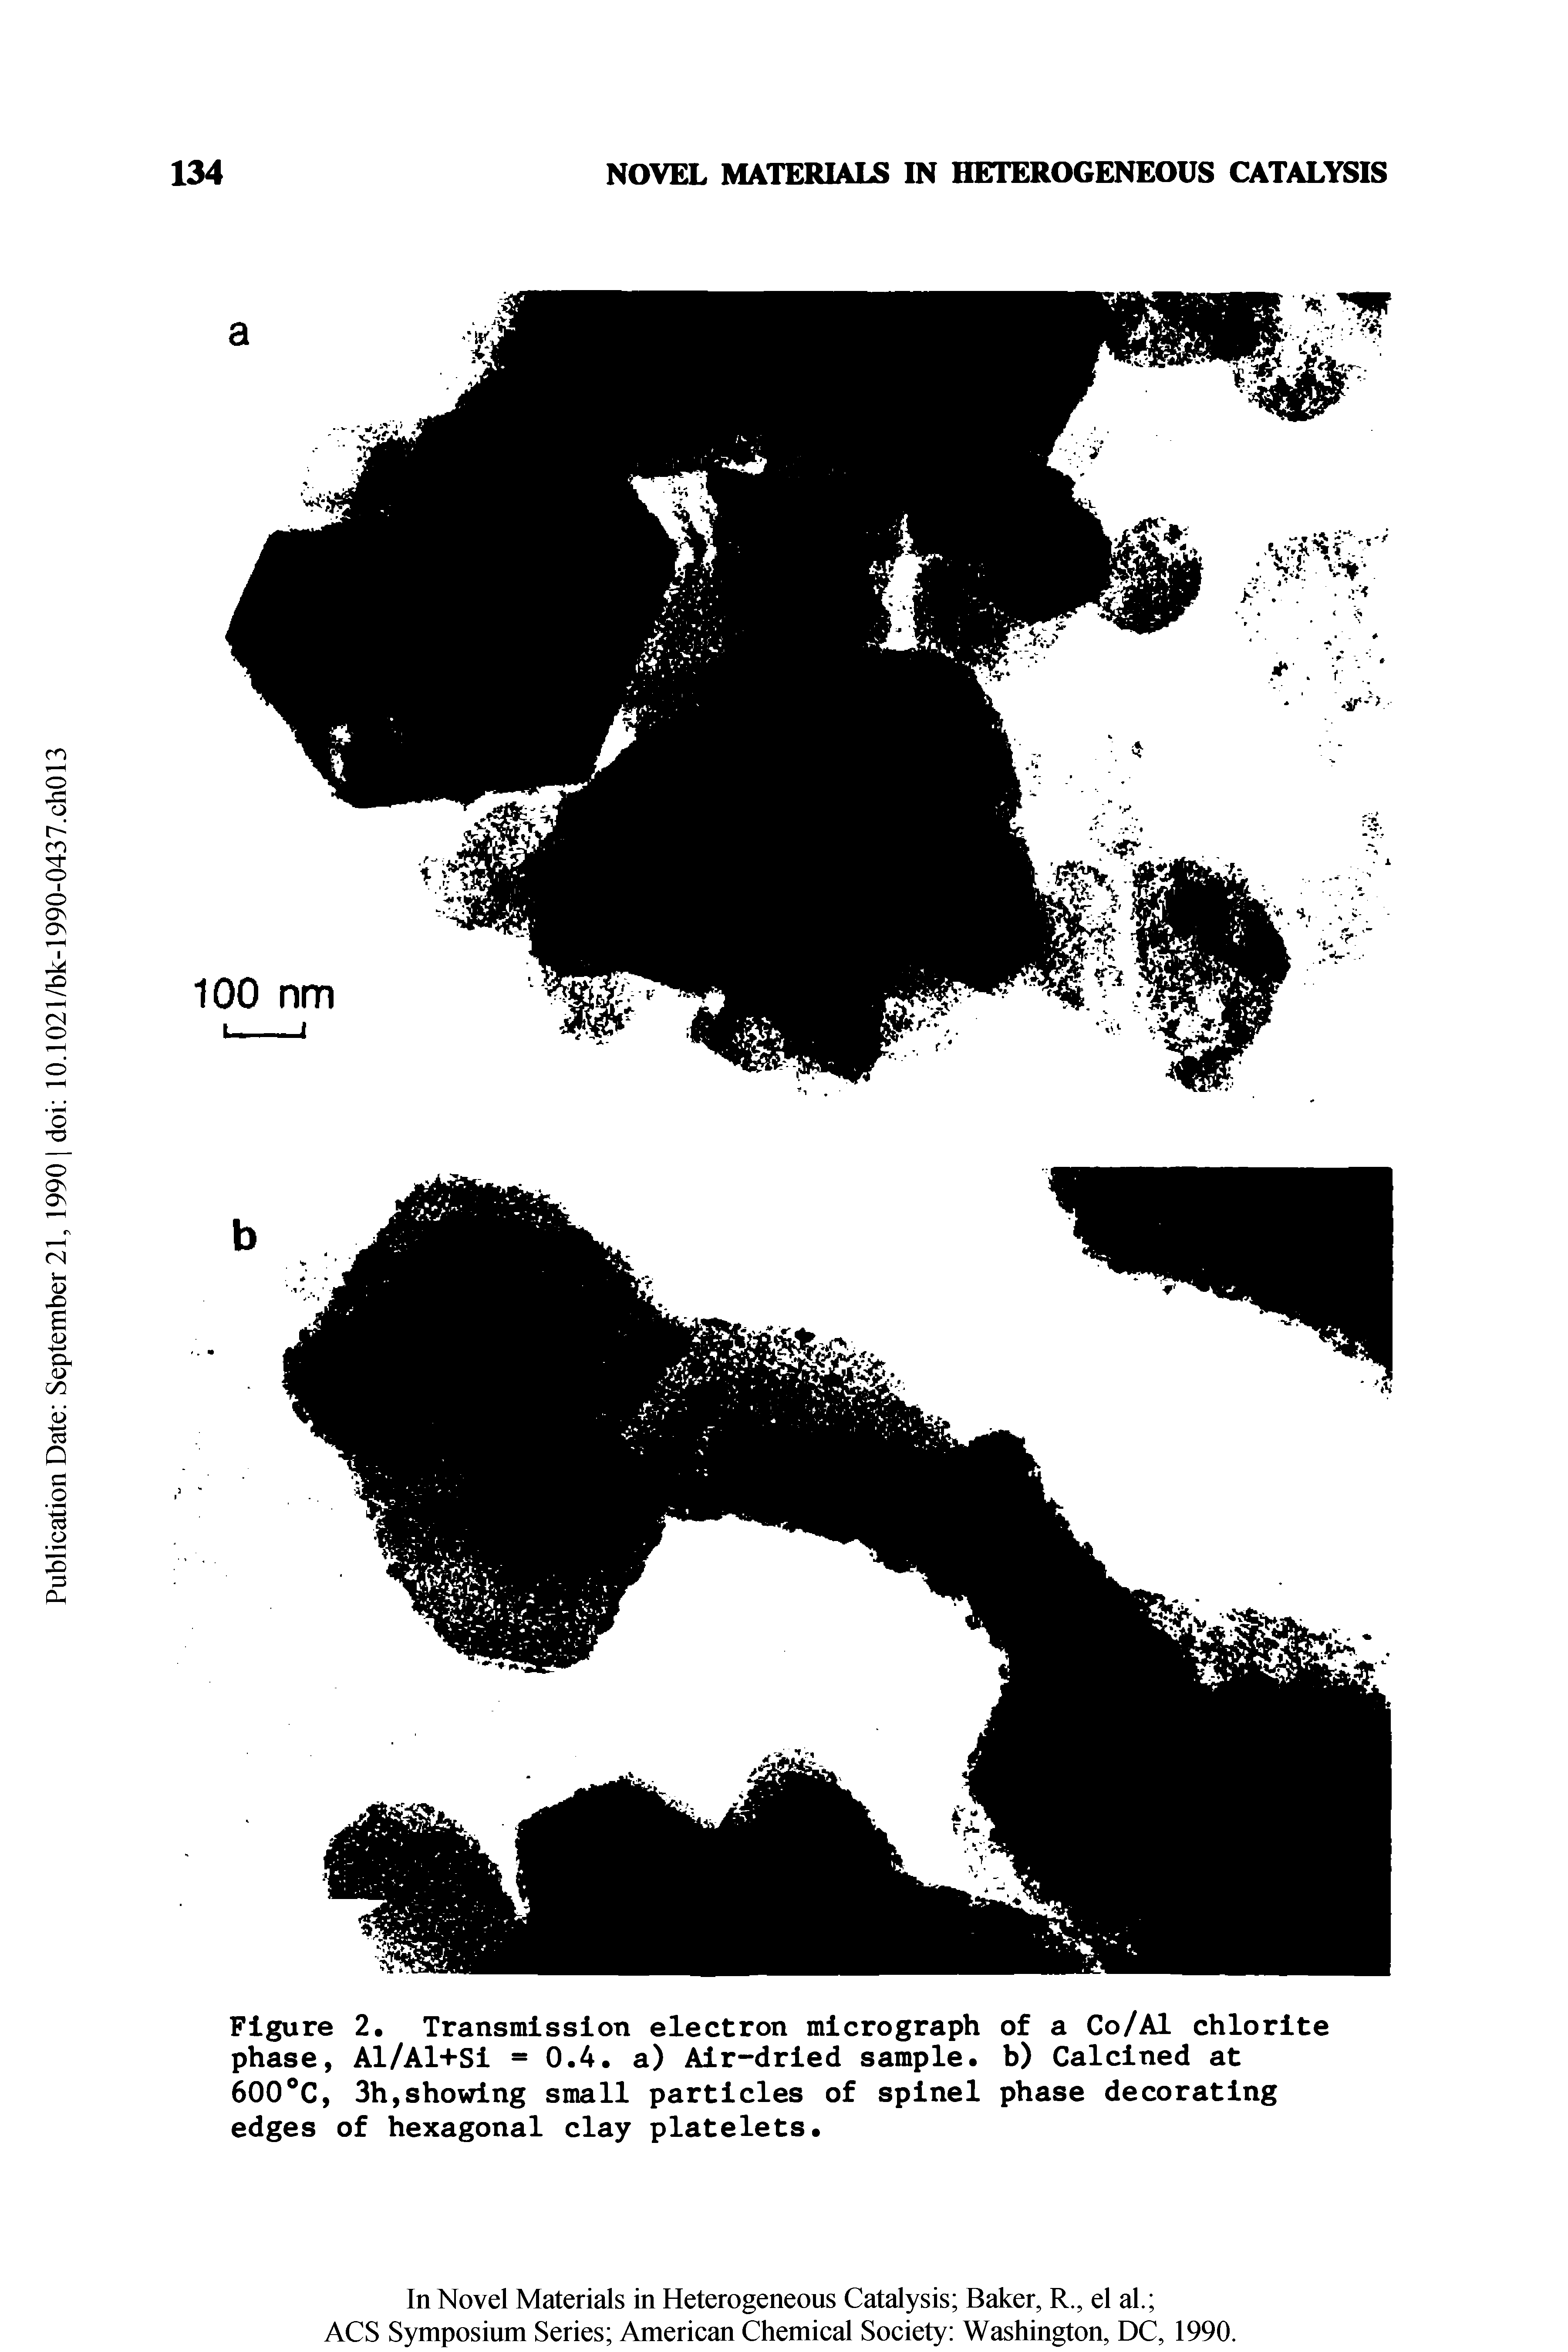 Figure 2. Transmission electron micrograph of a Co/Al chlorite phase, Al/Al+Si = 0.4. a) Air-dried sample, b) Calcined at 600 C, 3h,showing small particles of spinel phase decorating edges of hexagonal clay platelets.